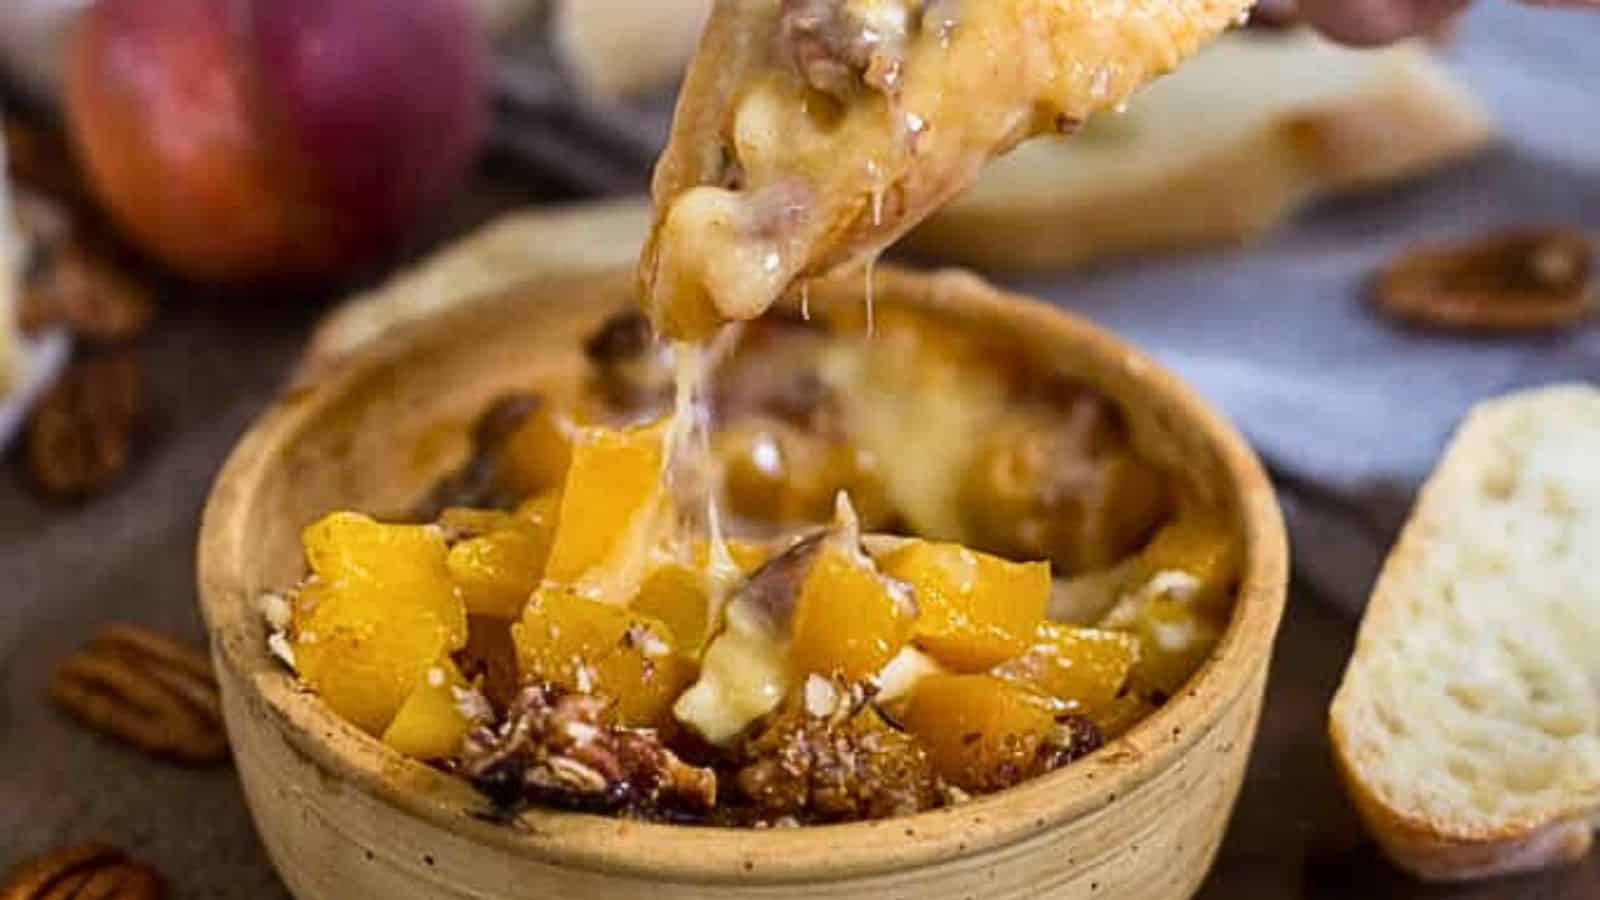 A person is dipping a piece of bread into a bowl of peach and pecan dip.